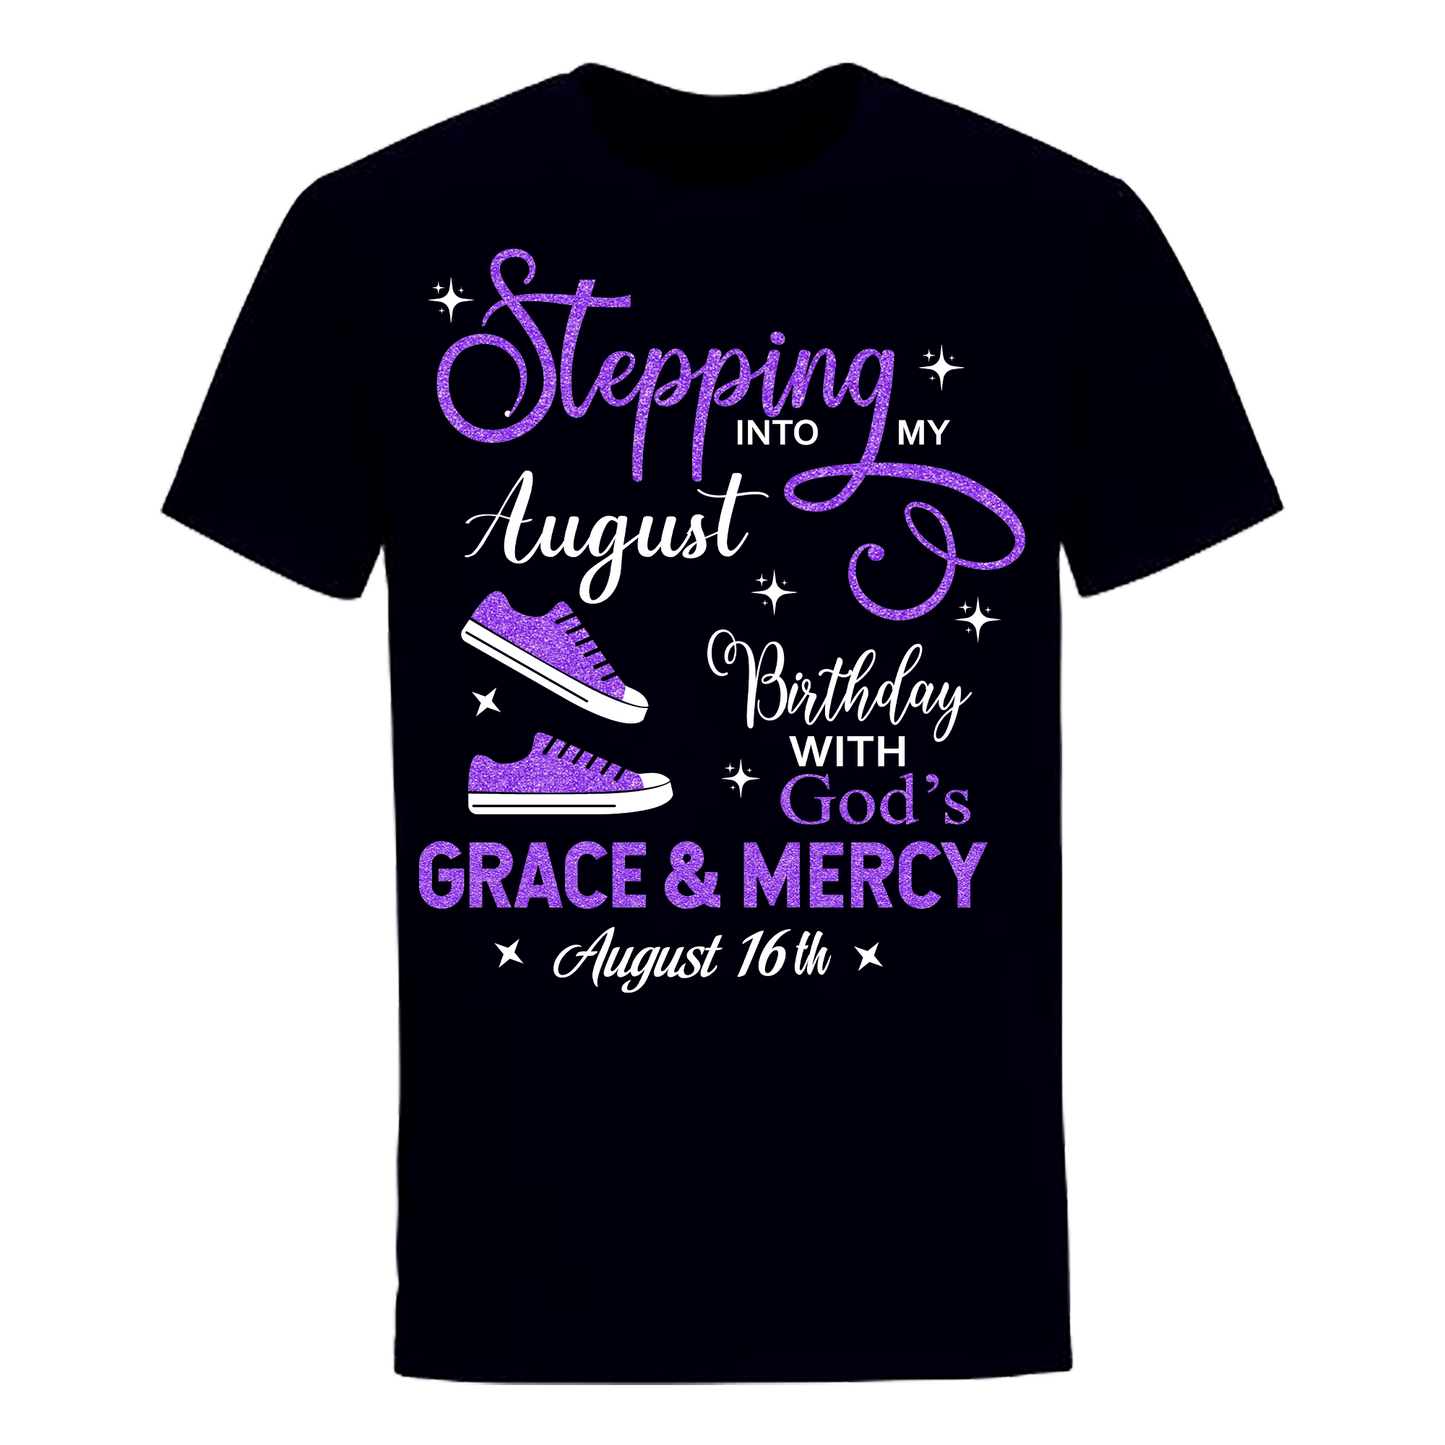 AUGUST 16 GRACE AND MERCY